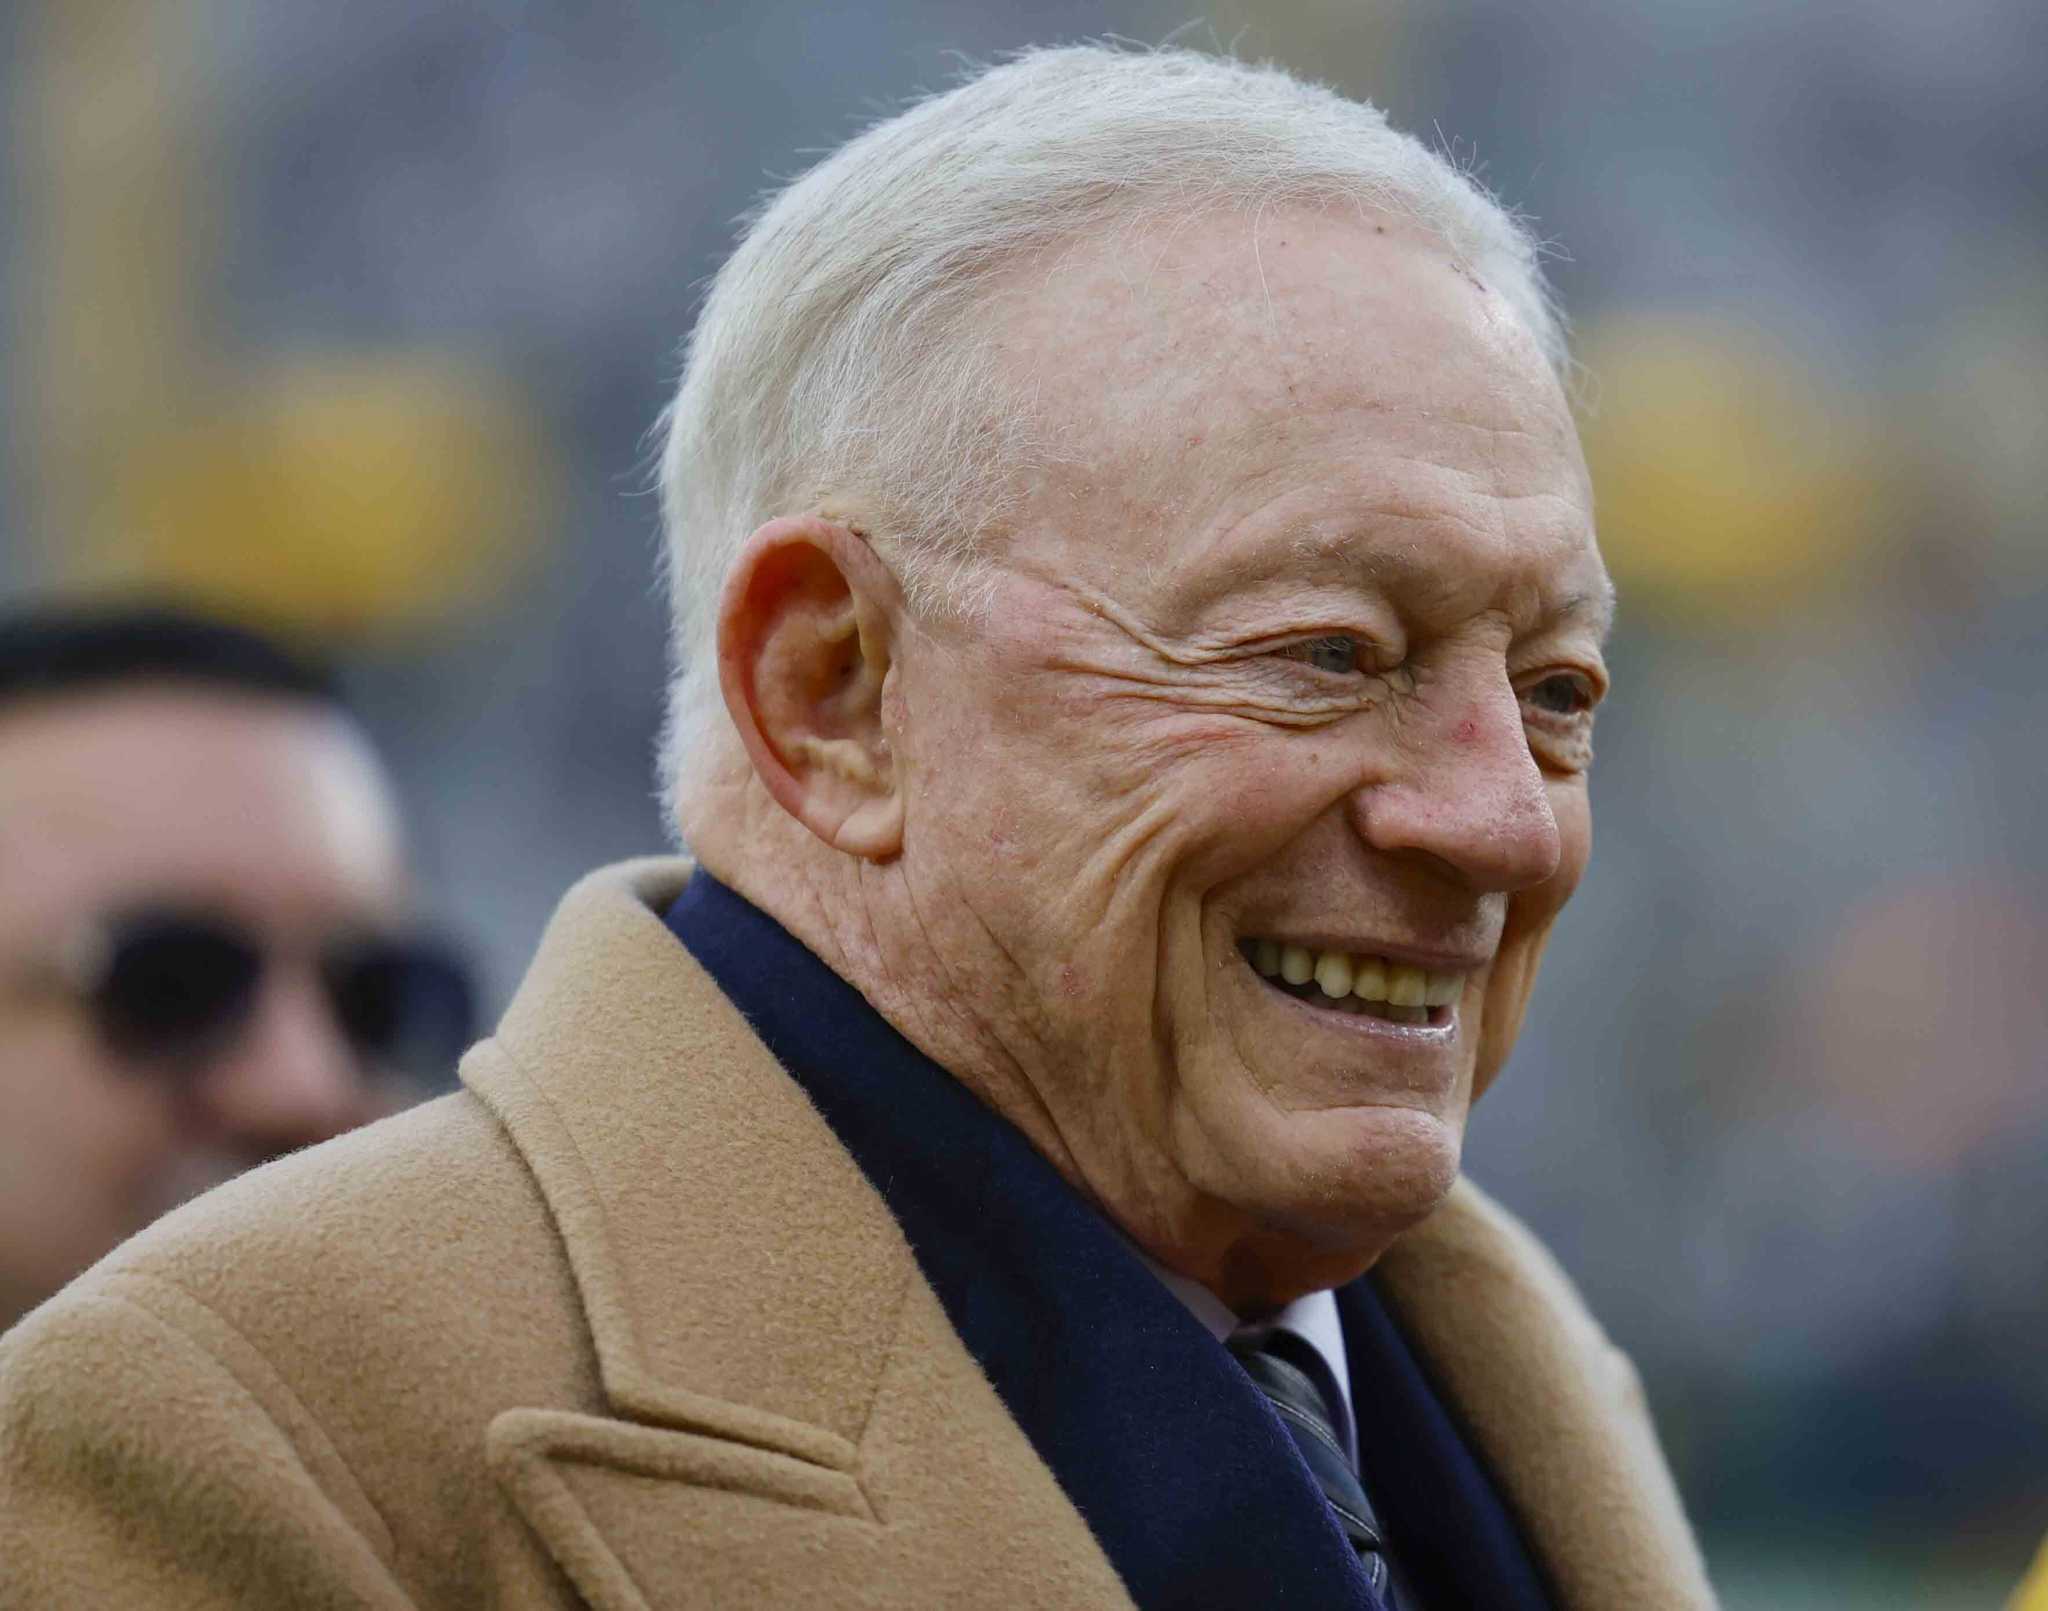 Jerry Jones: Cowboys owner's curious history with racism